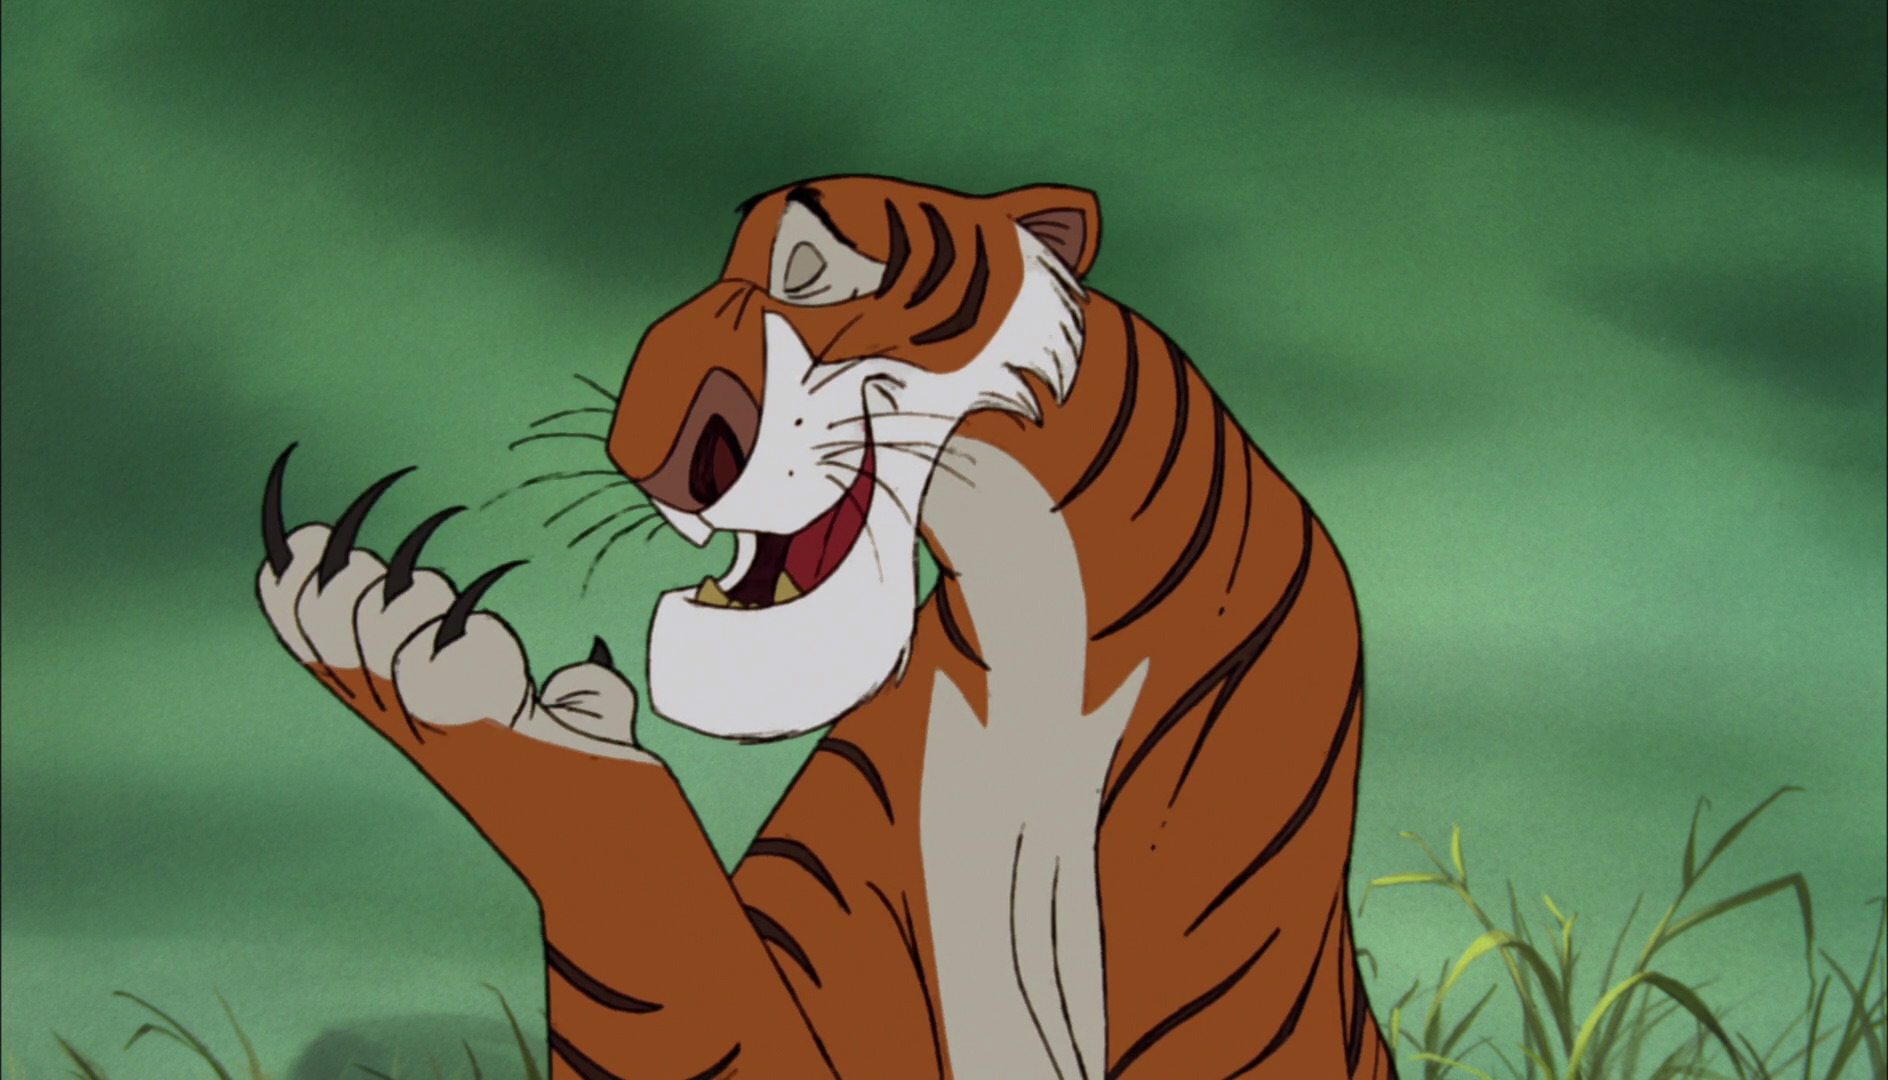 “Is possible you do not know who I am?” “Everyone runs from Shere Khan”  